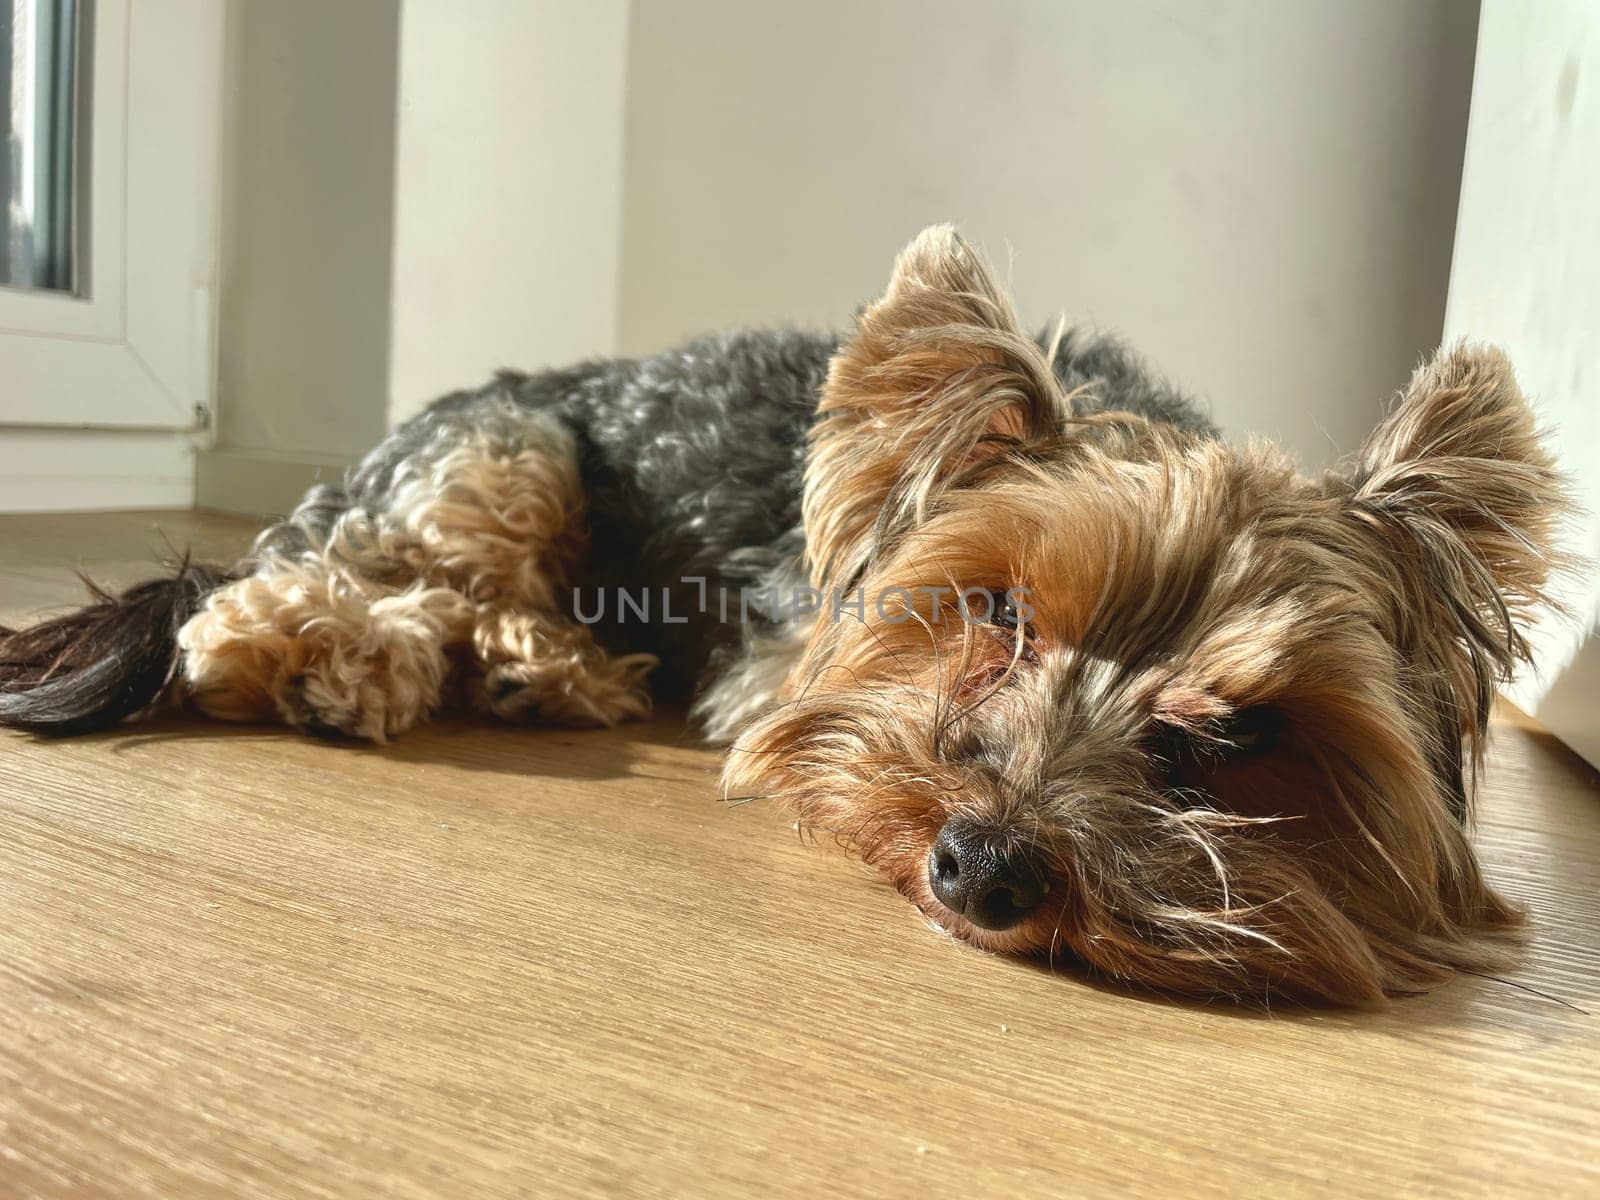 A small Yorkie dog lying on the floor, basking in the spring sun by MilaLazo